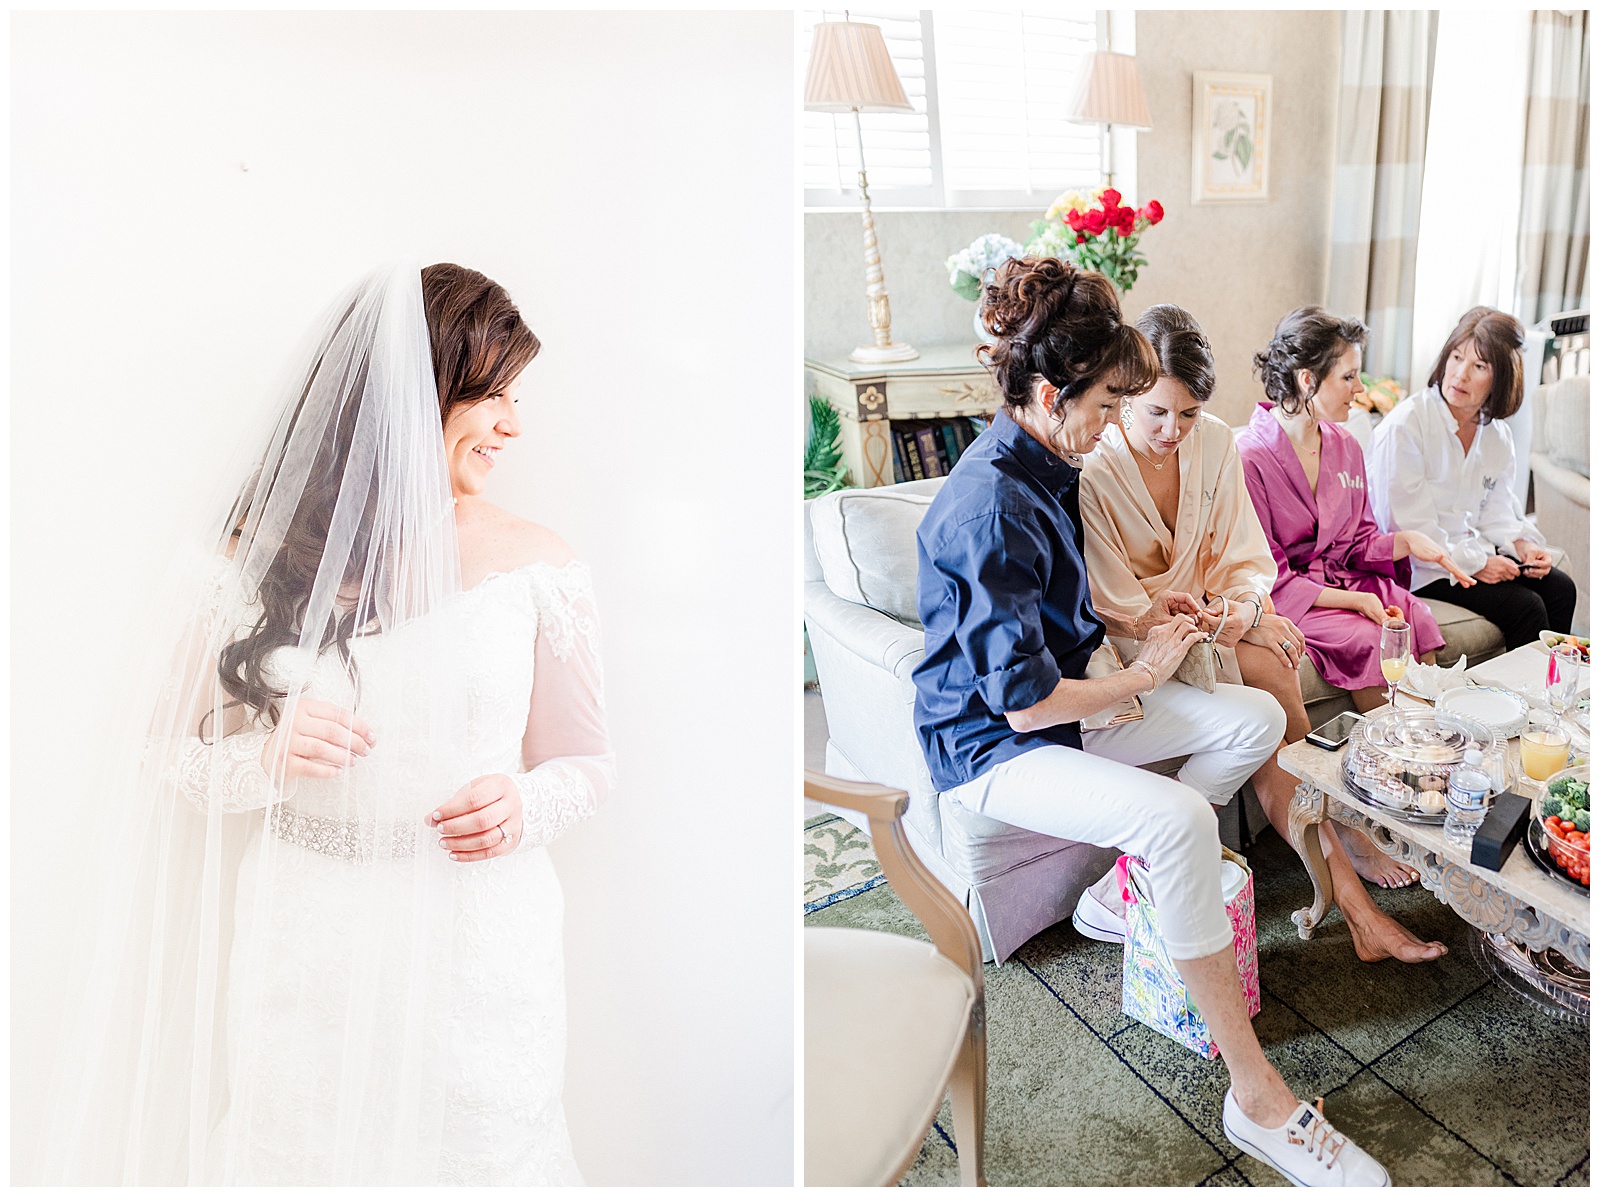 💍 bride and bridesmaids getting ready in lace wedding dress with rhinestone belt rhinestone barrette in hair down with pearls 💍 Bright Colorful Summer City Wedding in Charlotte, NC with Taryn and Ryan | Kevyn Dixon Photography